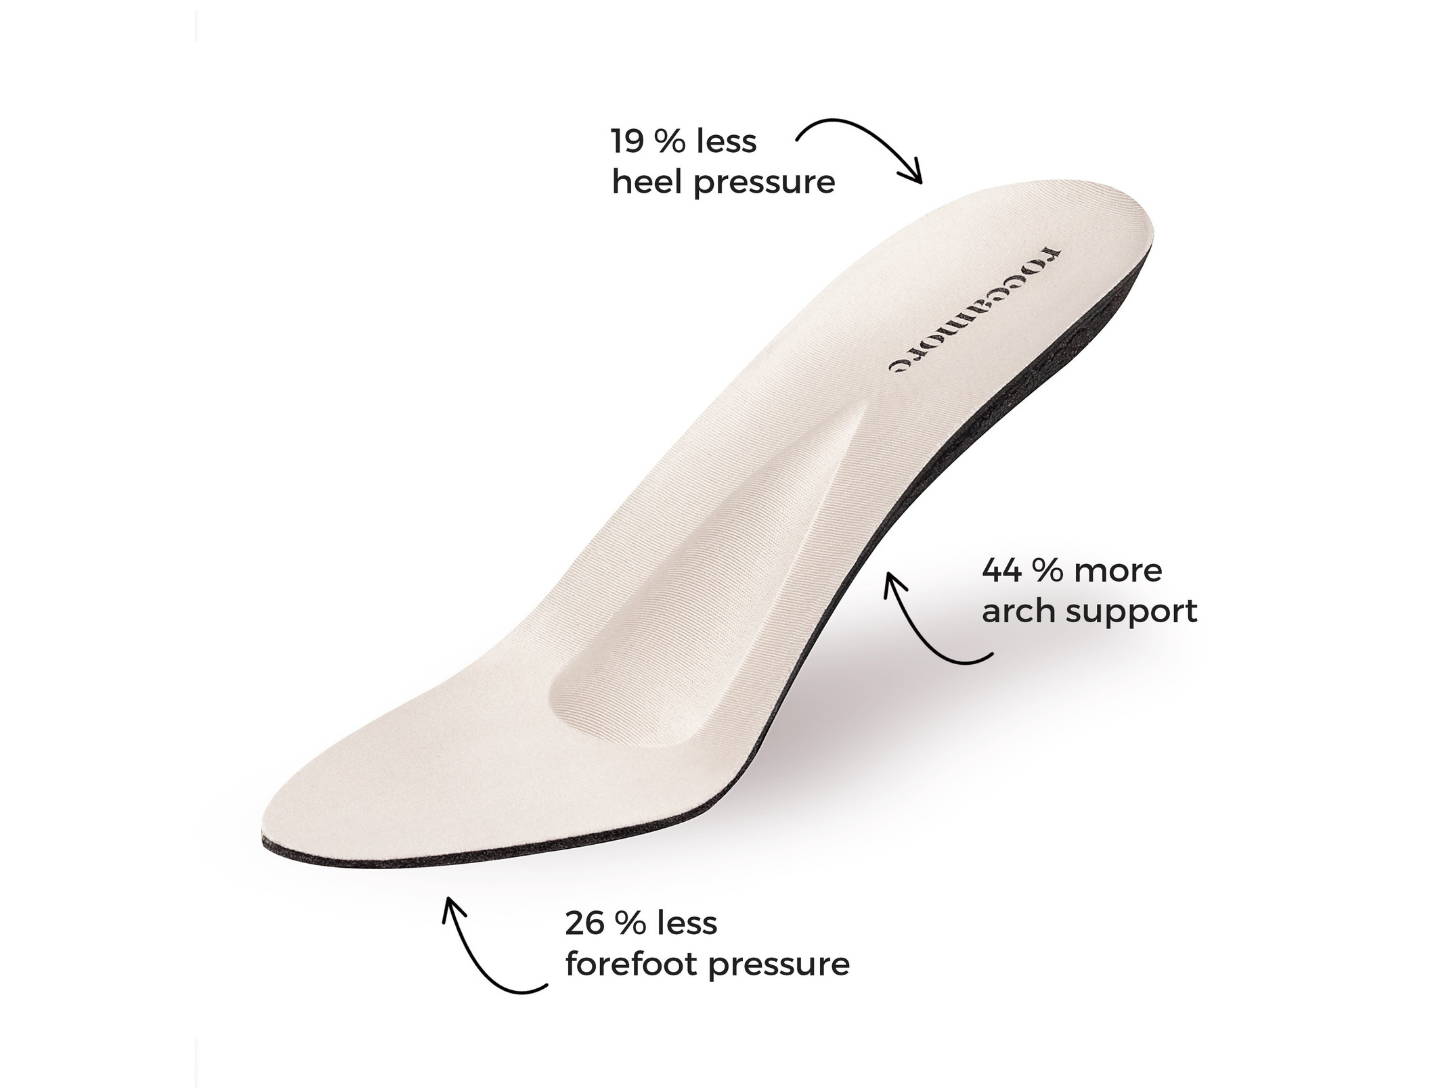 About Our Insole